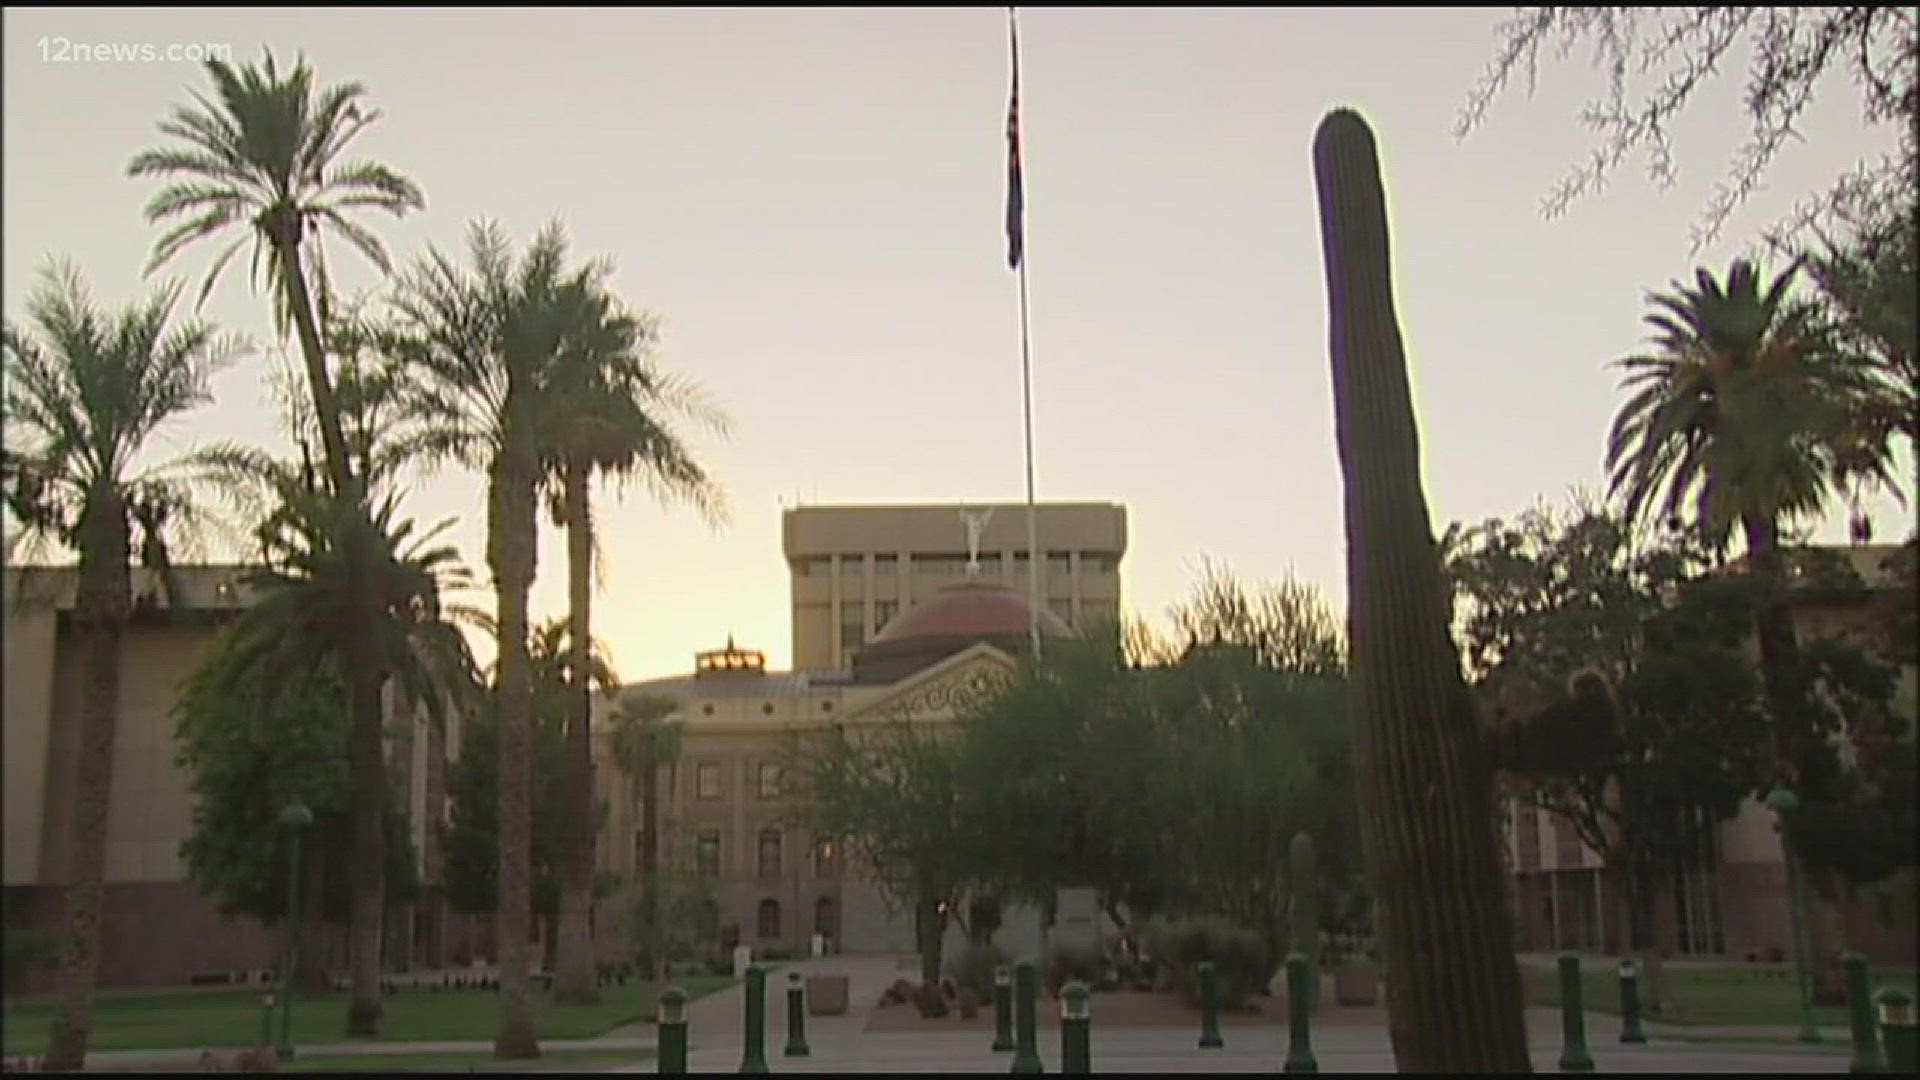 Governor Doug Ducey is being called on in response to the deadly school shooting in Florida.